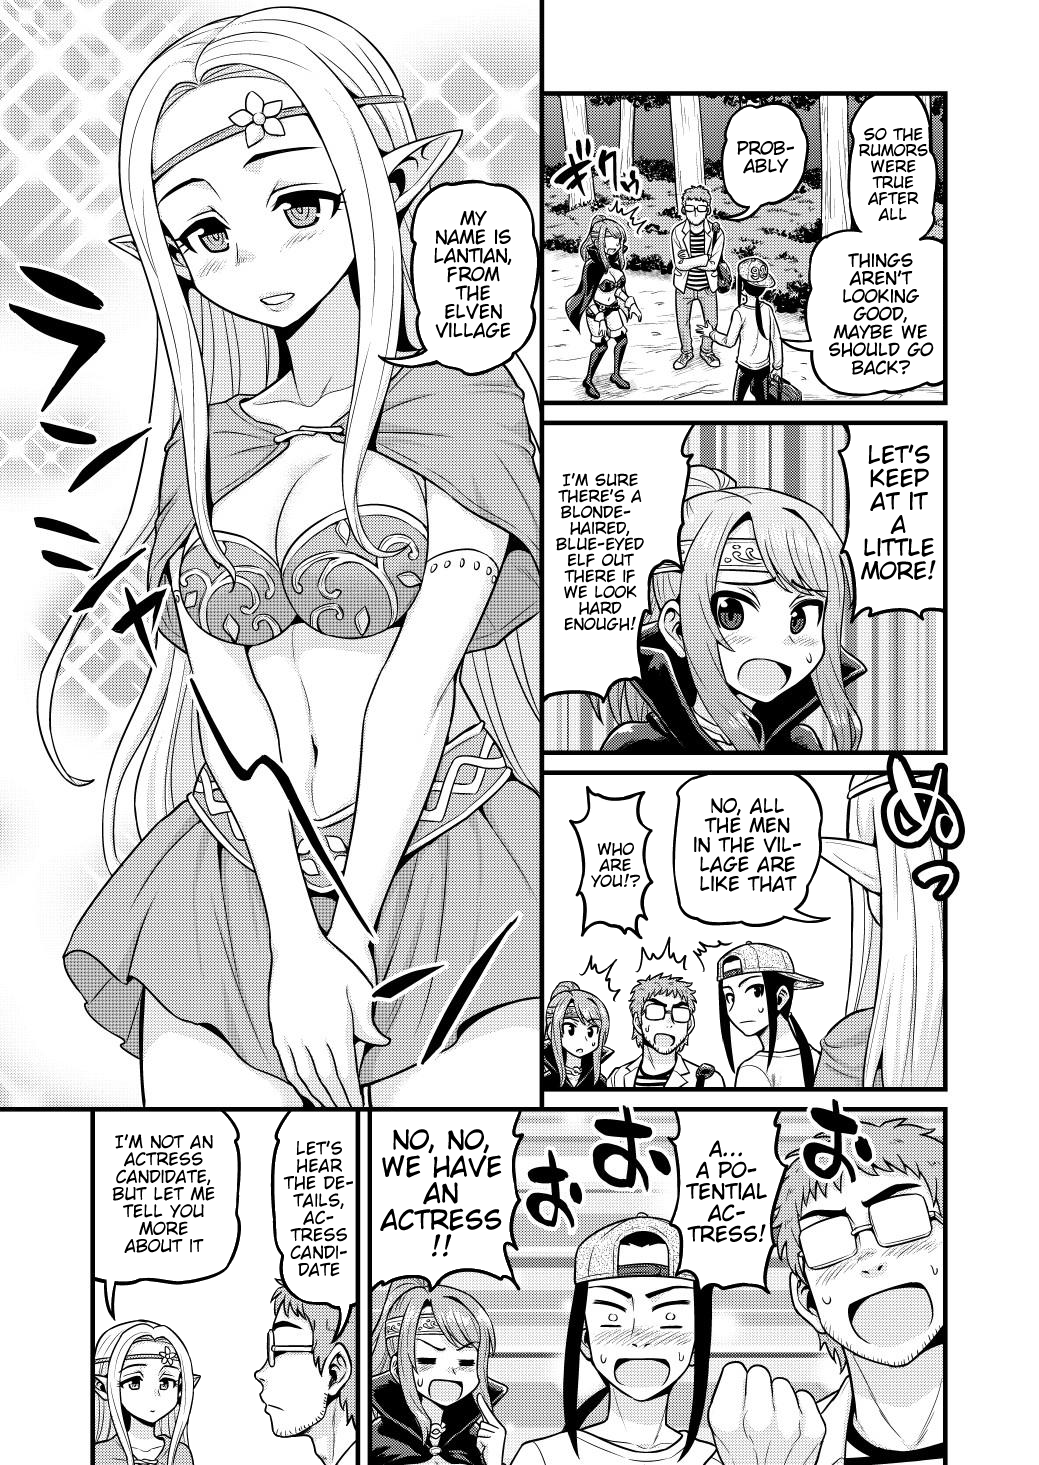 Filming Adult Videos in Another World - Chapter 3 Page 16